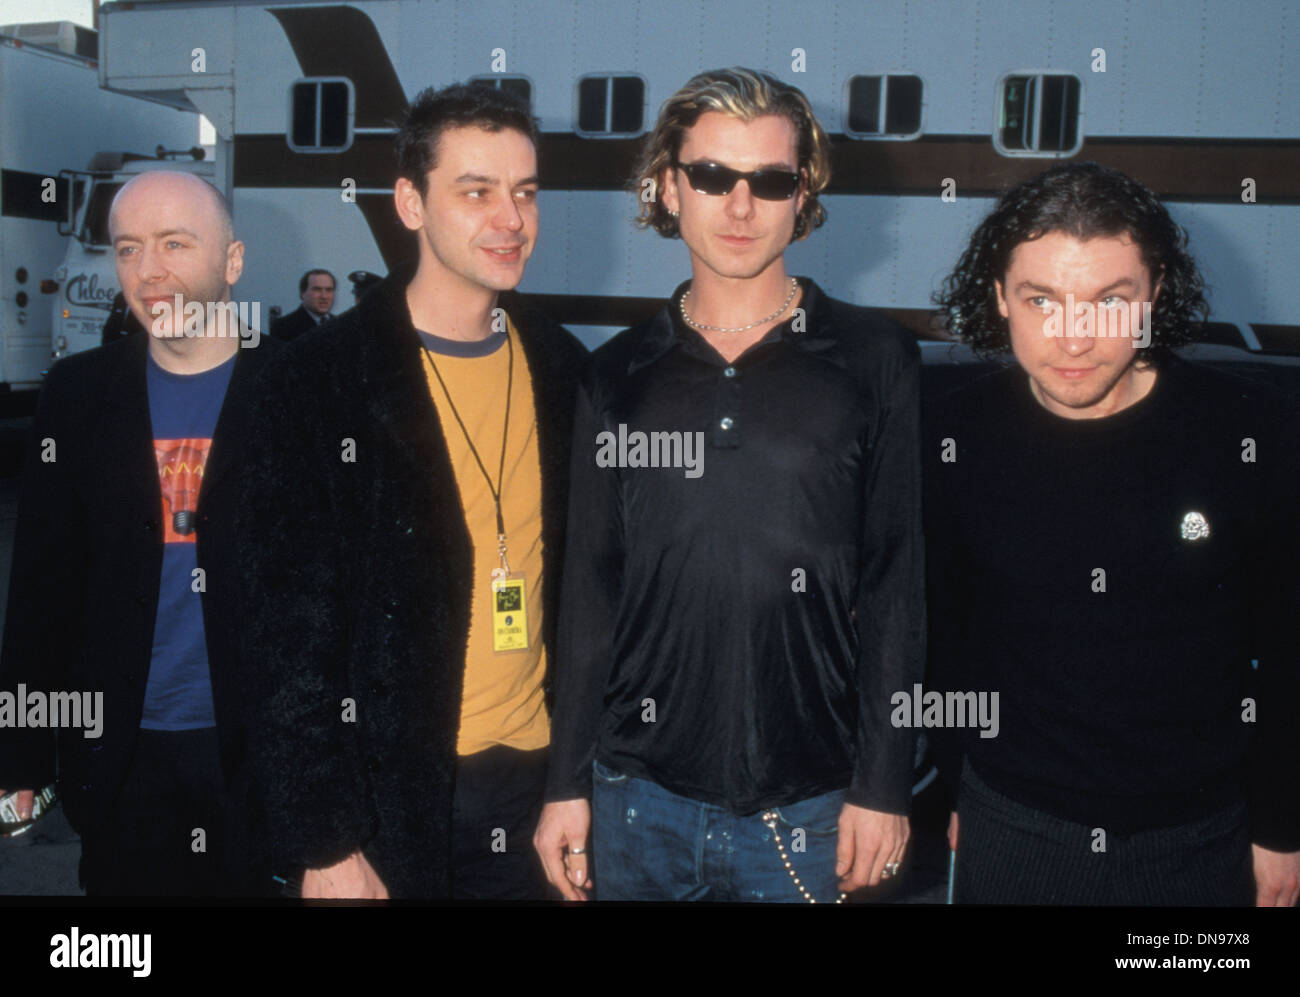 RUSH UK group in 1997 at 20th American Music Awards.  From left: Gavin Rossdale, Robin Goodridge, Nigel Pulsford, Dave Parsons. Stock Photo